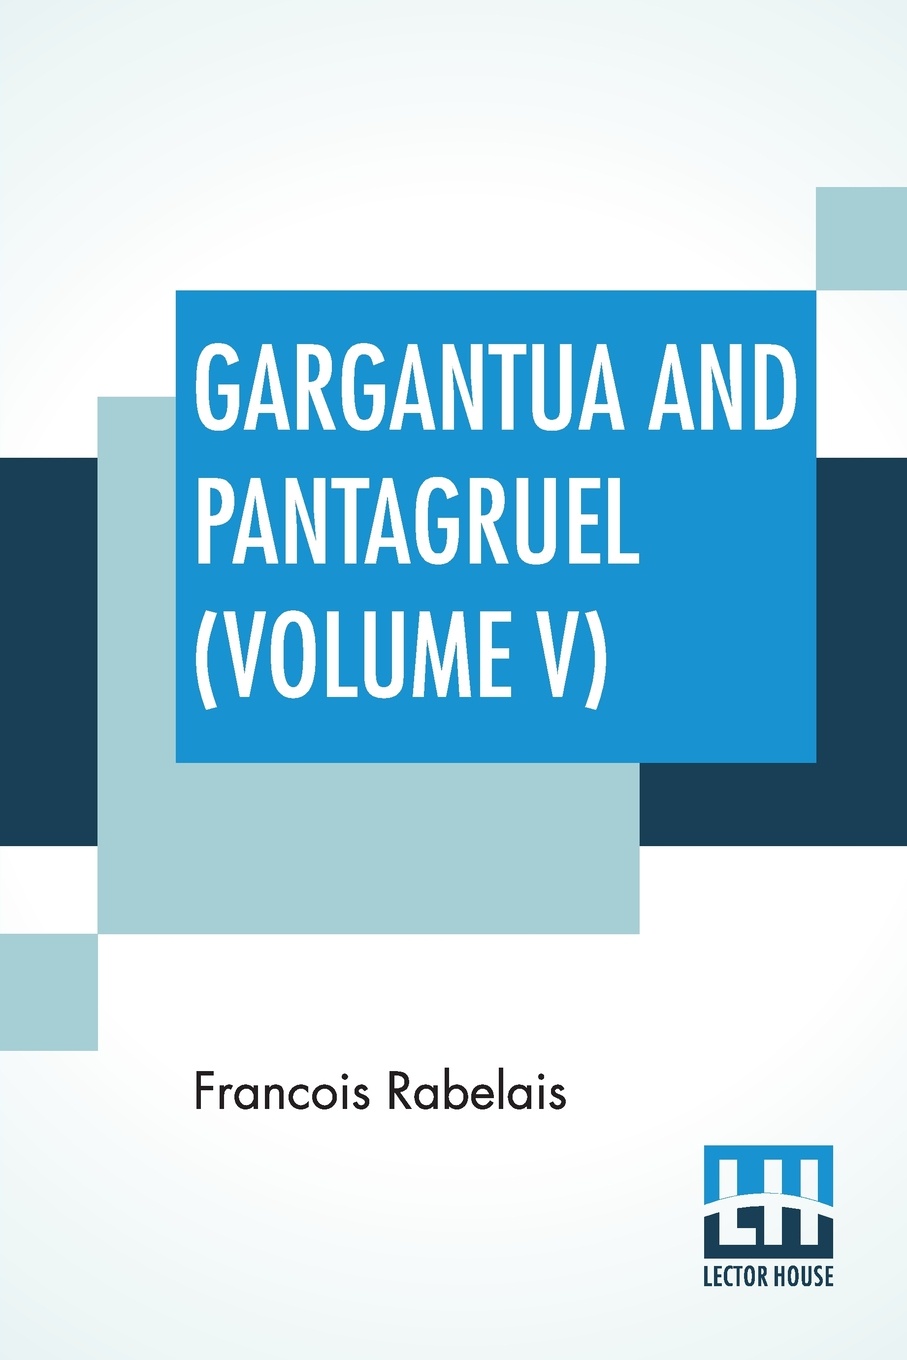 Gargantua And Pantagruel (Volume V). Five Books Of The Lives, Heroic Deeds And Sayings Of Gargantua And His Son Pantagruel, Translated Into English By Sir Thomas Urquhart Of Cromarty And Peter Antony Motteux